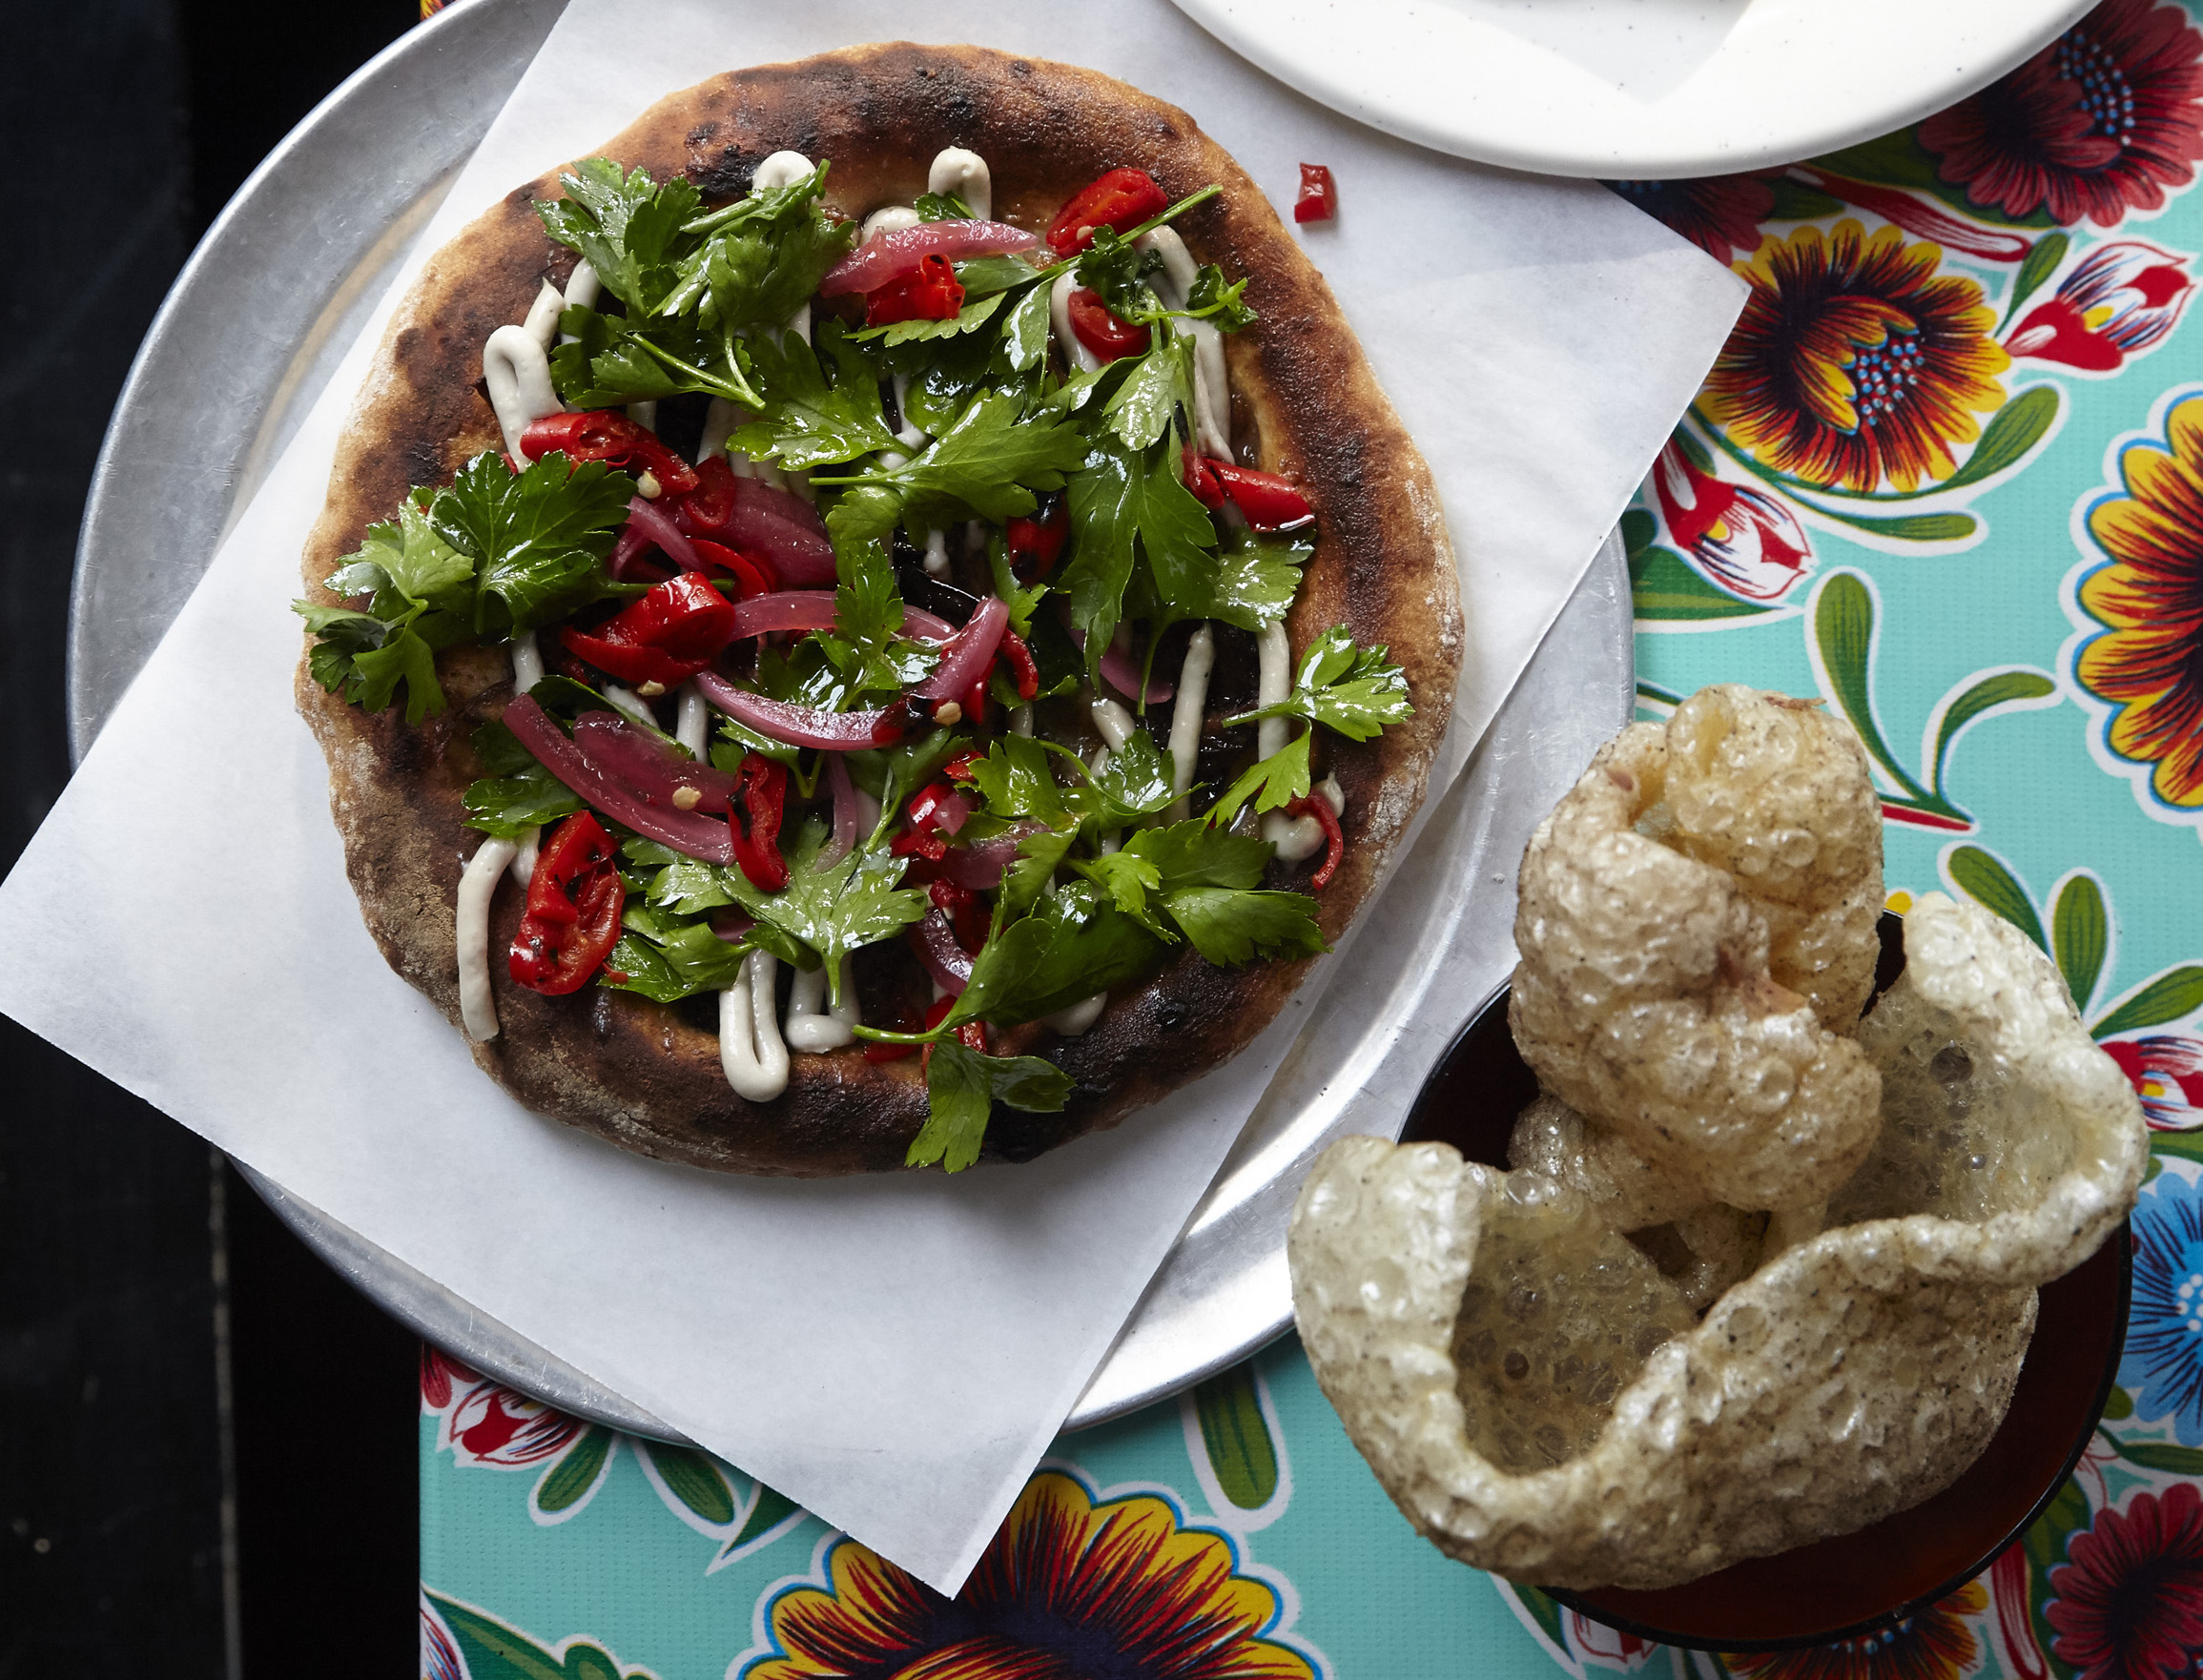 A lamb offal flatbread and pork crackling at Black Axe Mangal, featuring flowery tablecloths